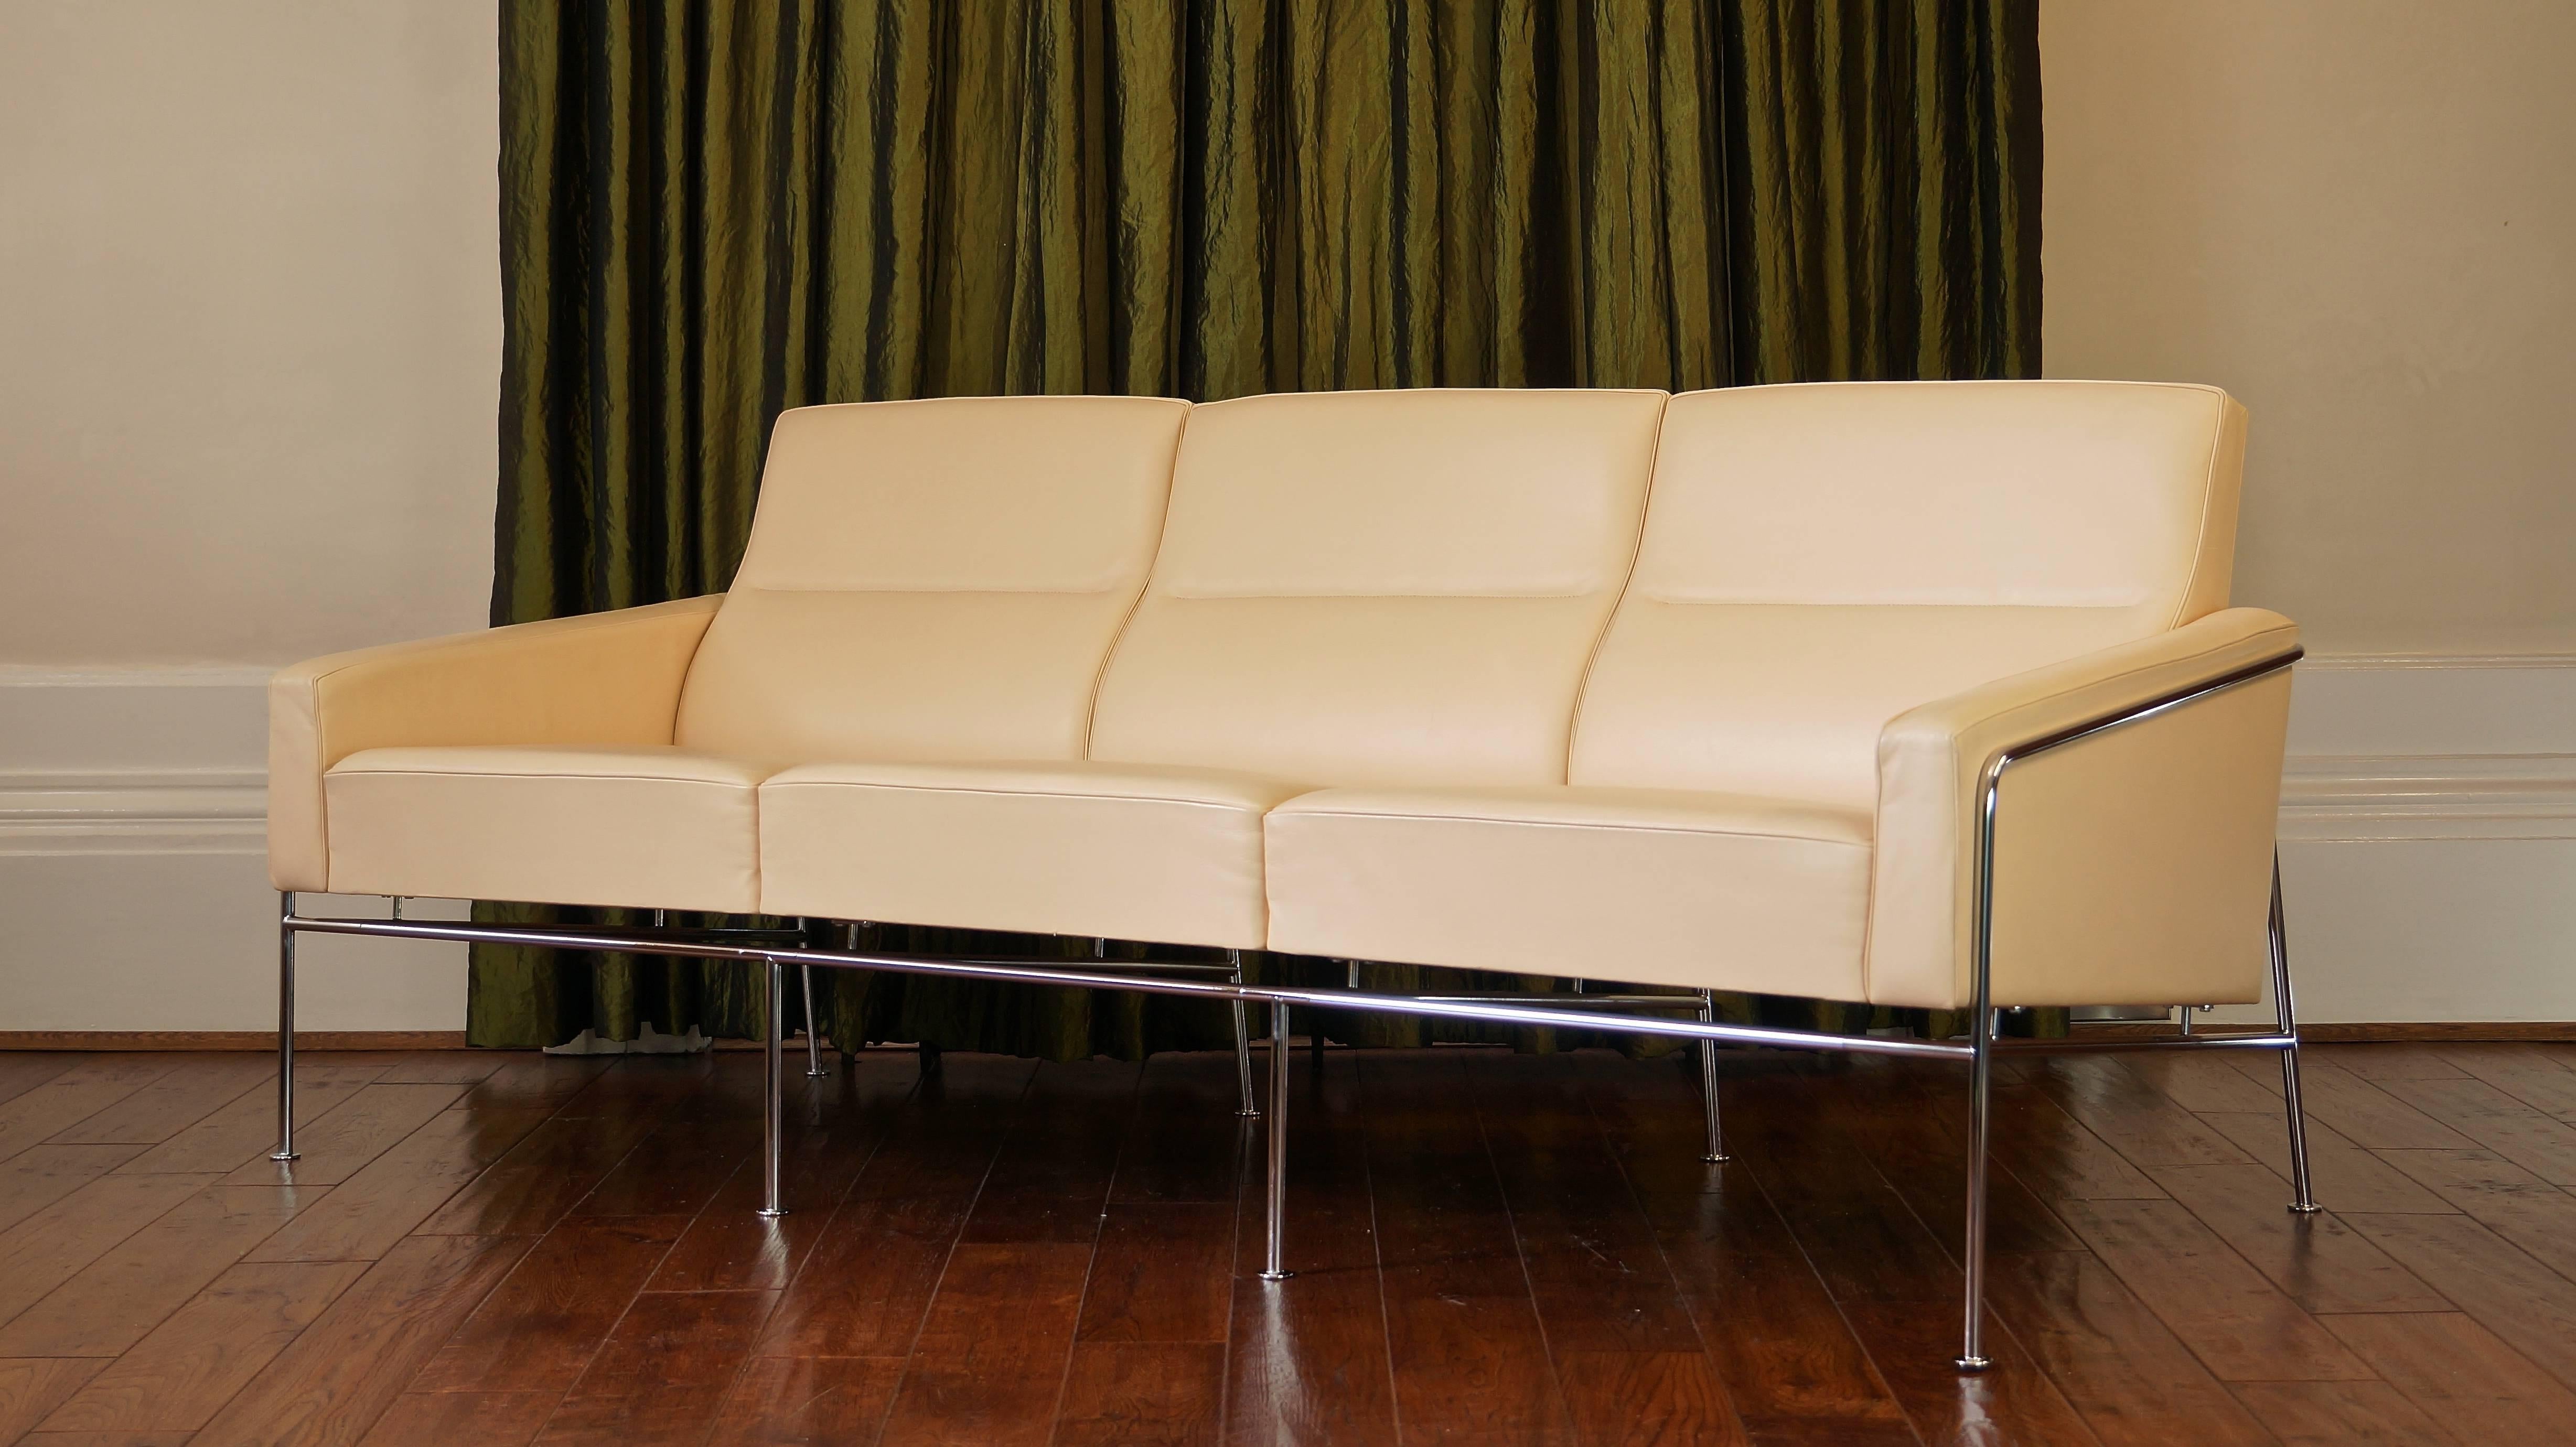 Arne Jacobsen series 3303 sofa in premium cream leather. 

This classic sofa offers both a clean, modern look and incredibly comfortable seating. The leather is in excellent condition with only light signs of use.

A number of matching chairs